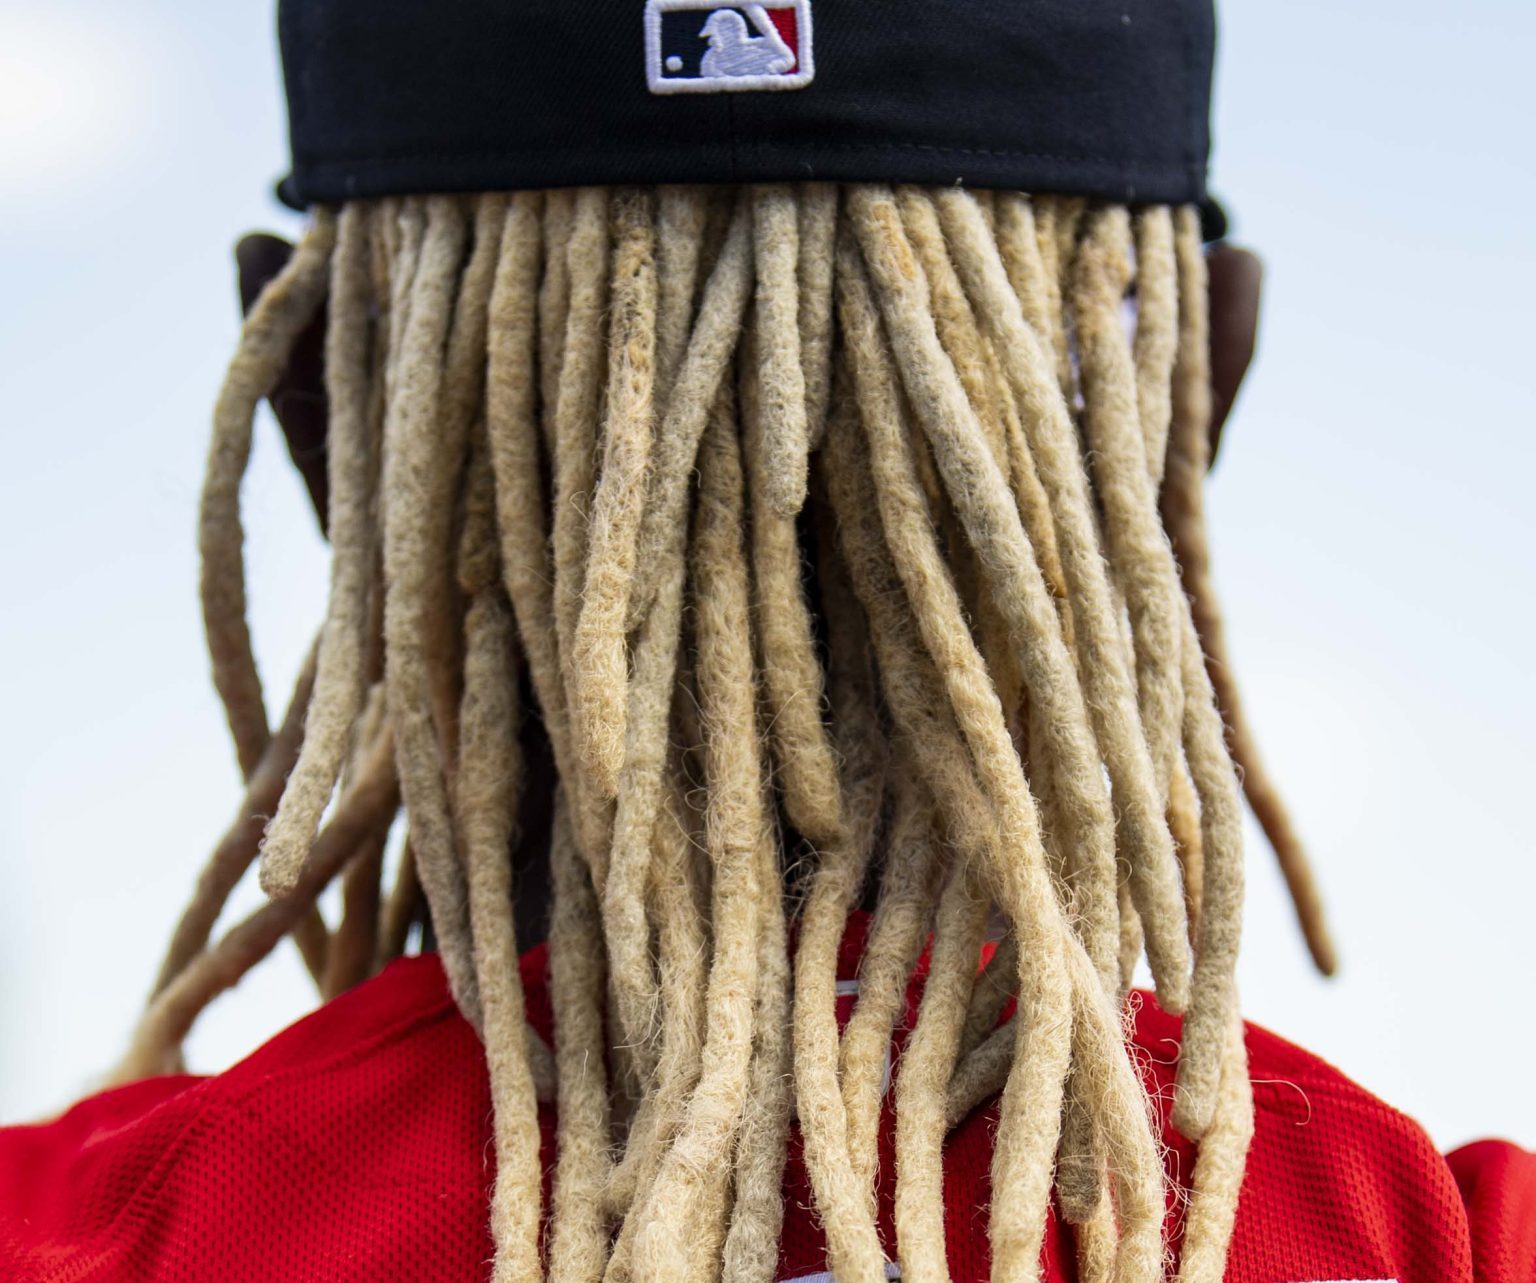 Family Reportedly Hires Lawyer After Texas School Suspends Black Teen For Refusing To Cut His Locs